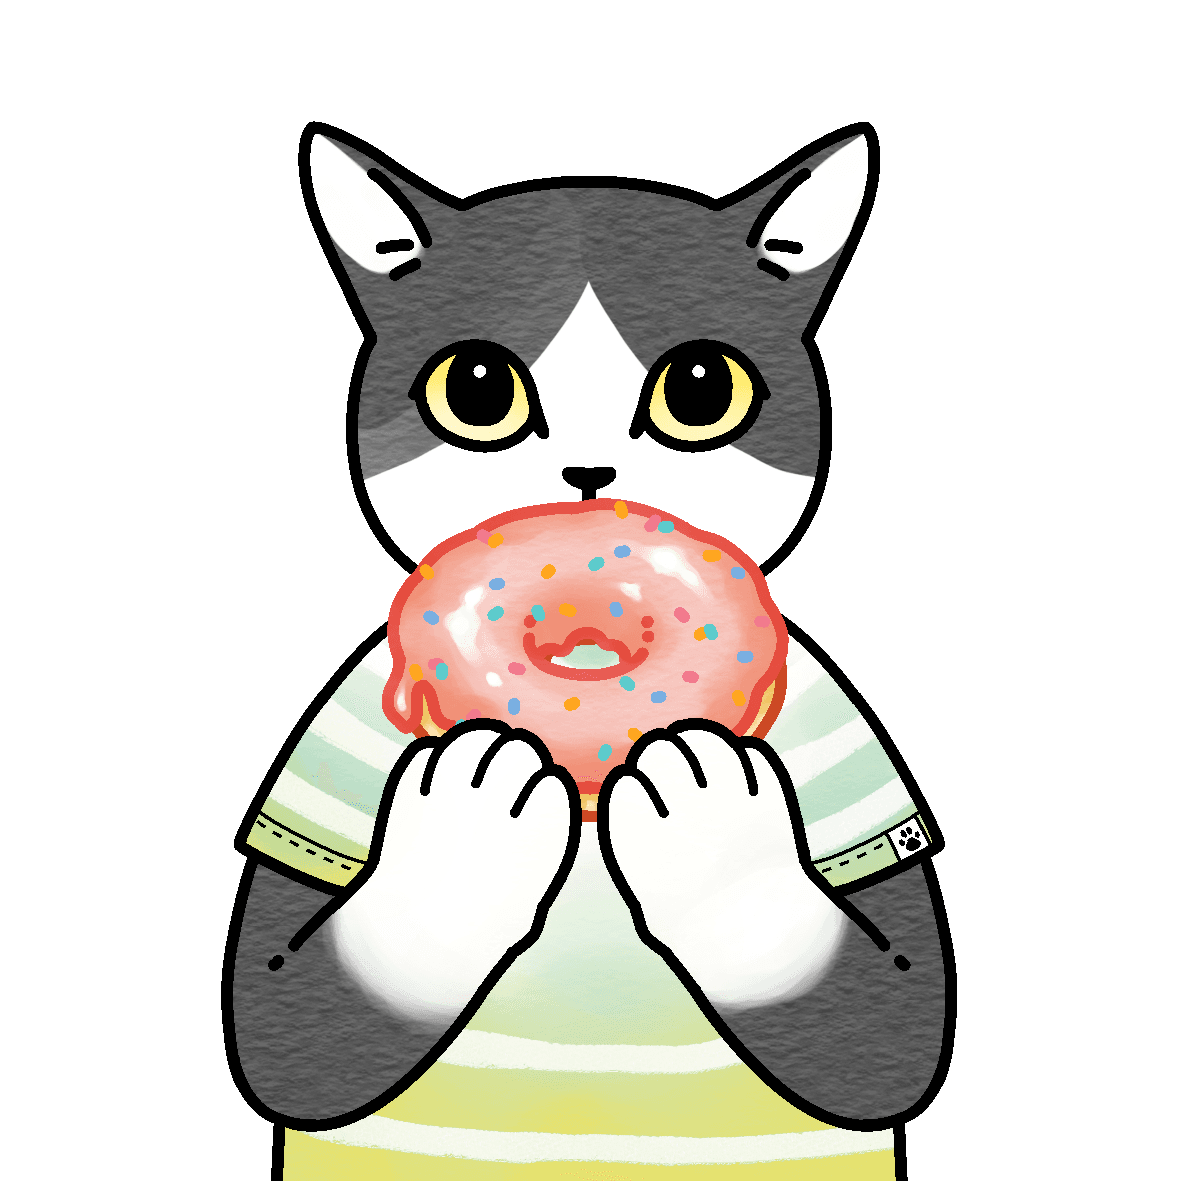 Hachiwale loves donuts.